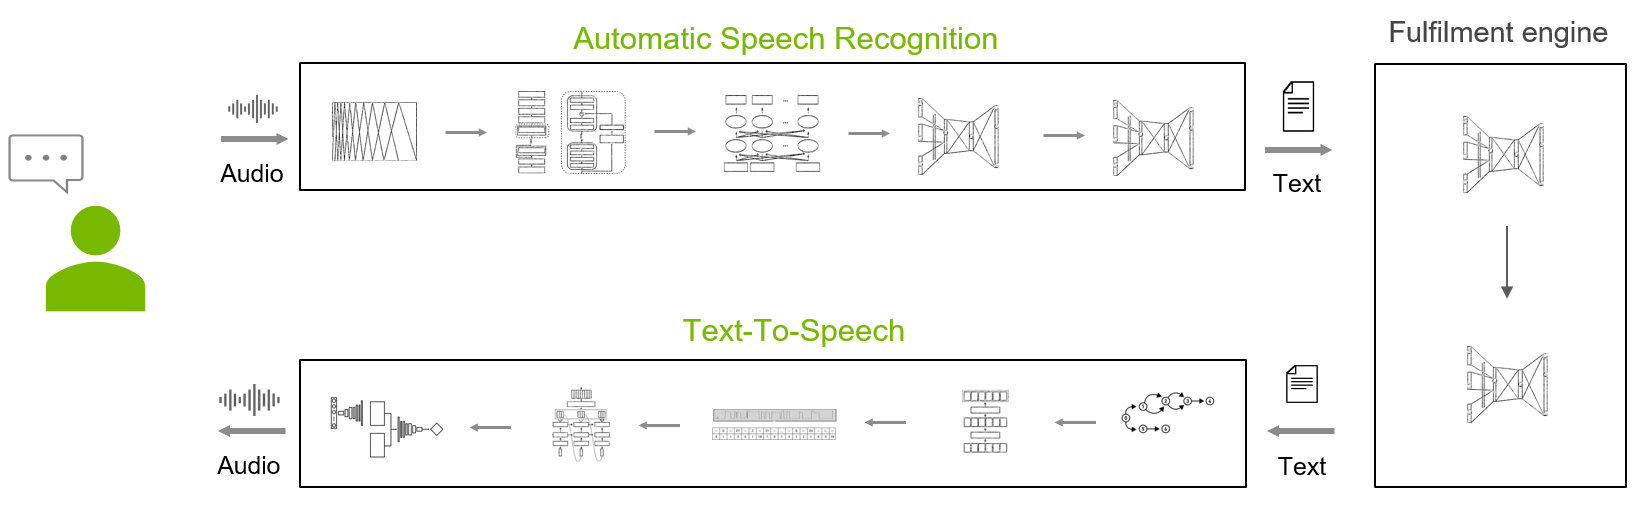 Automatic speech recognition, fulfillment engine, and text-to-speech are the three primary components.